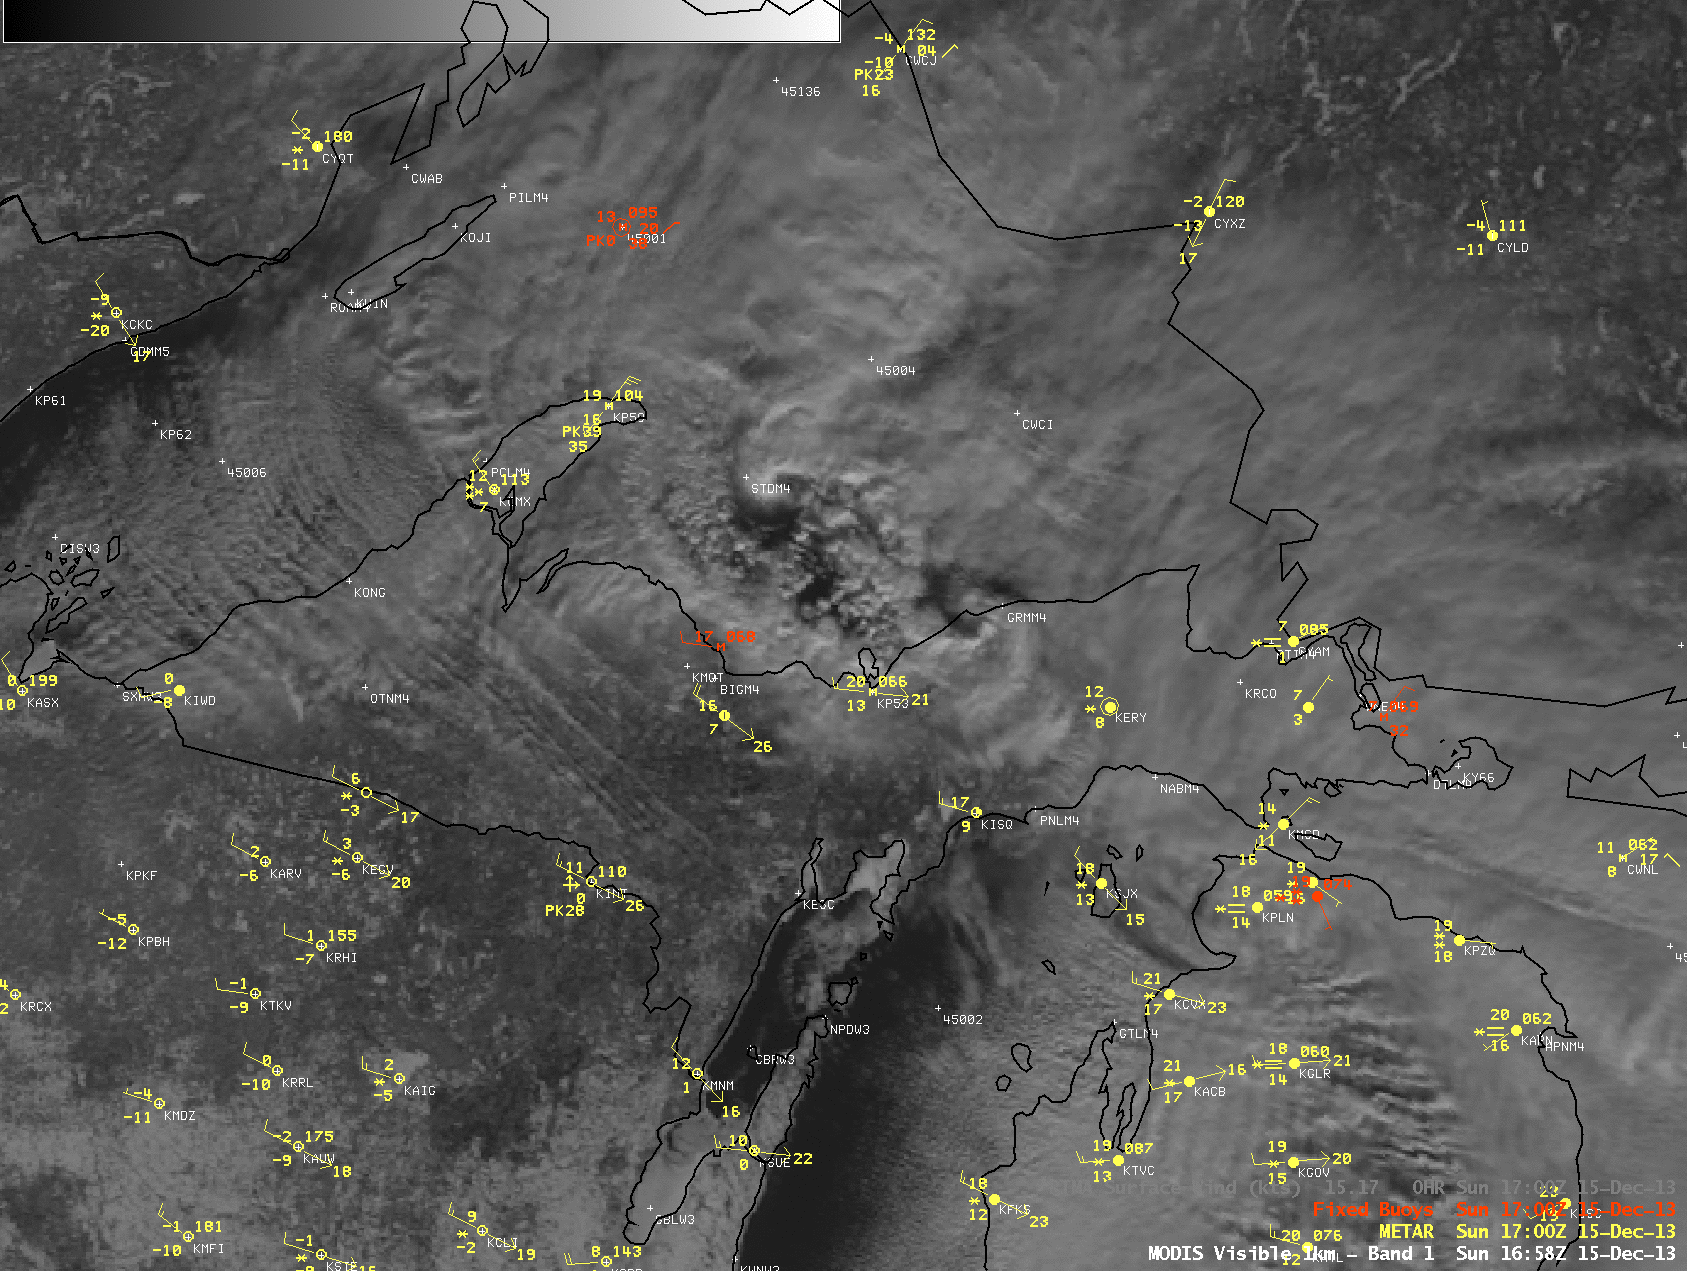 MODIS 0.65 Âµm visible channel images, with METAR surface and buoy reports